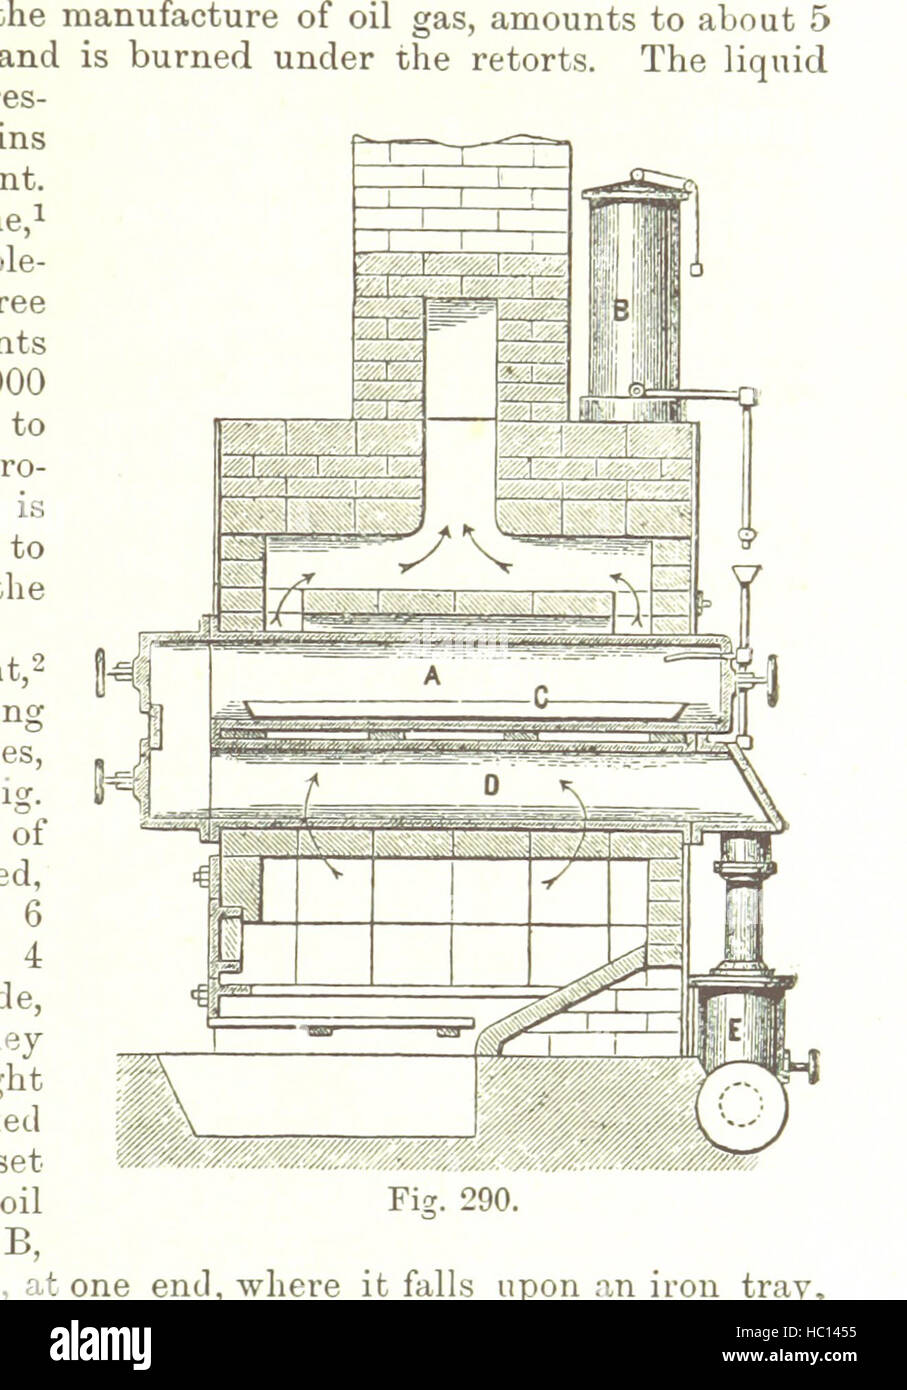 Image taken from page 309 of 'Petroleum: a treatise on the geographical distribution and geological occurrence of petroleum and natural gas ... By B. Redwood, assisted by G. T. Holloway, and other contributors ... With maps, etc' Image taken from page 309 of 'Petroleum a treatise on Stock Photo